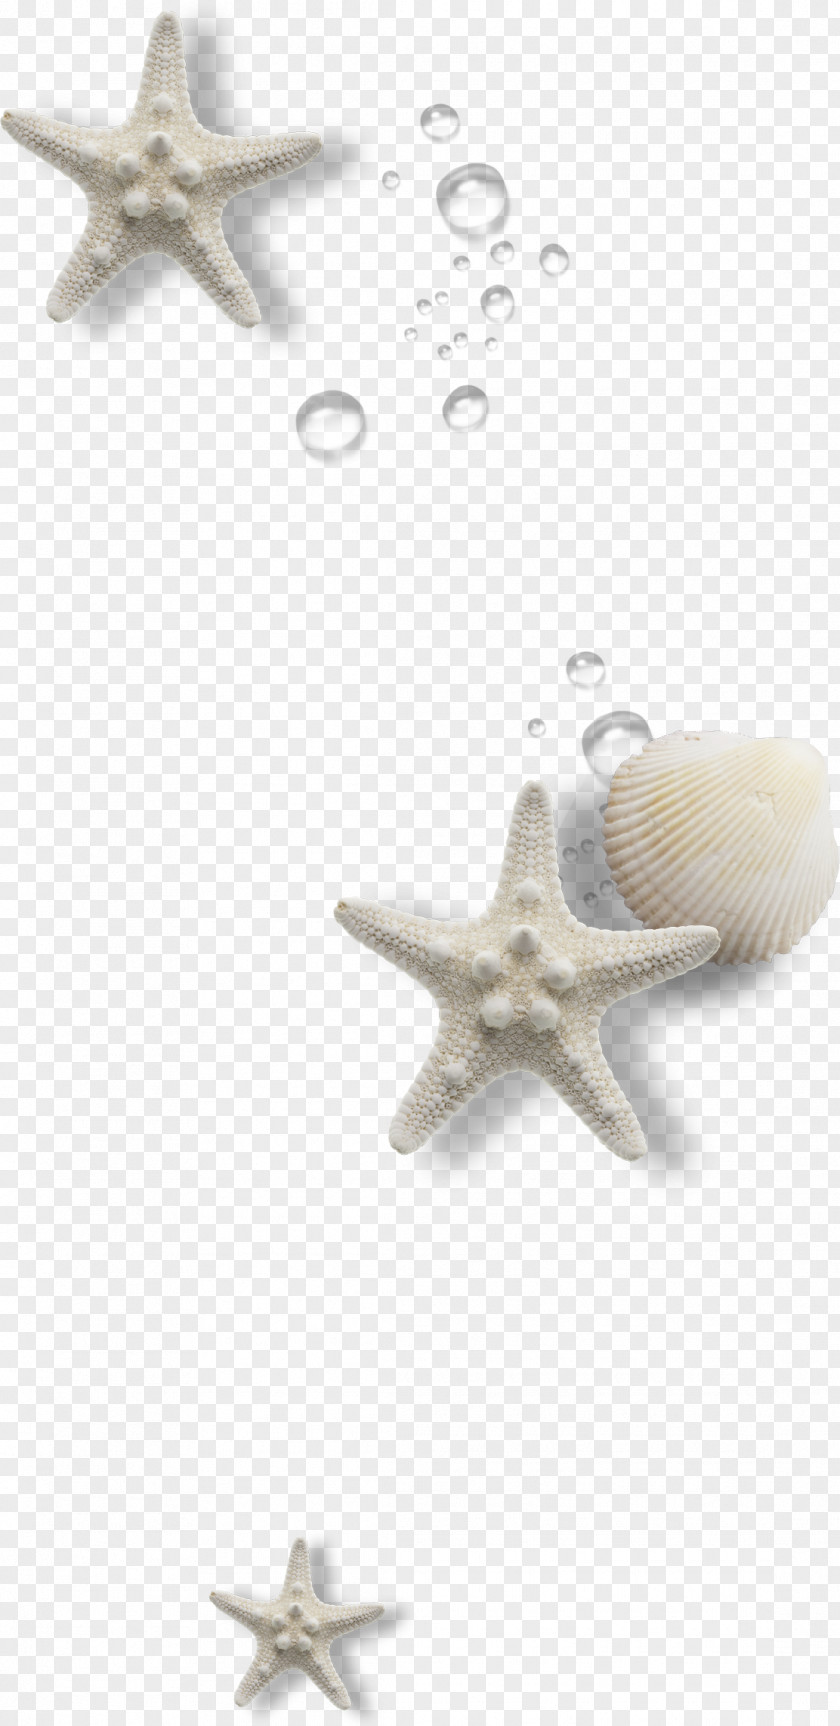 Shell PNG clipart PNG